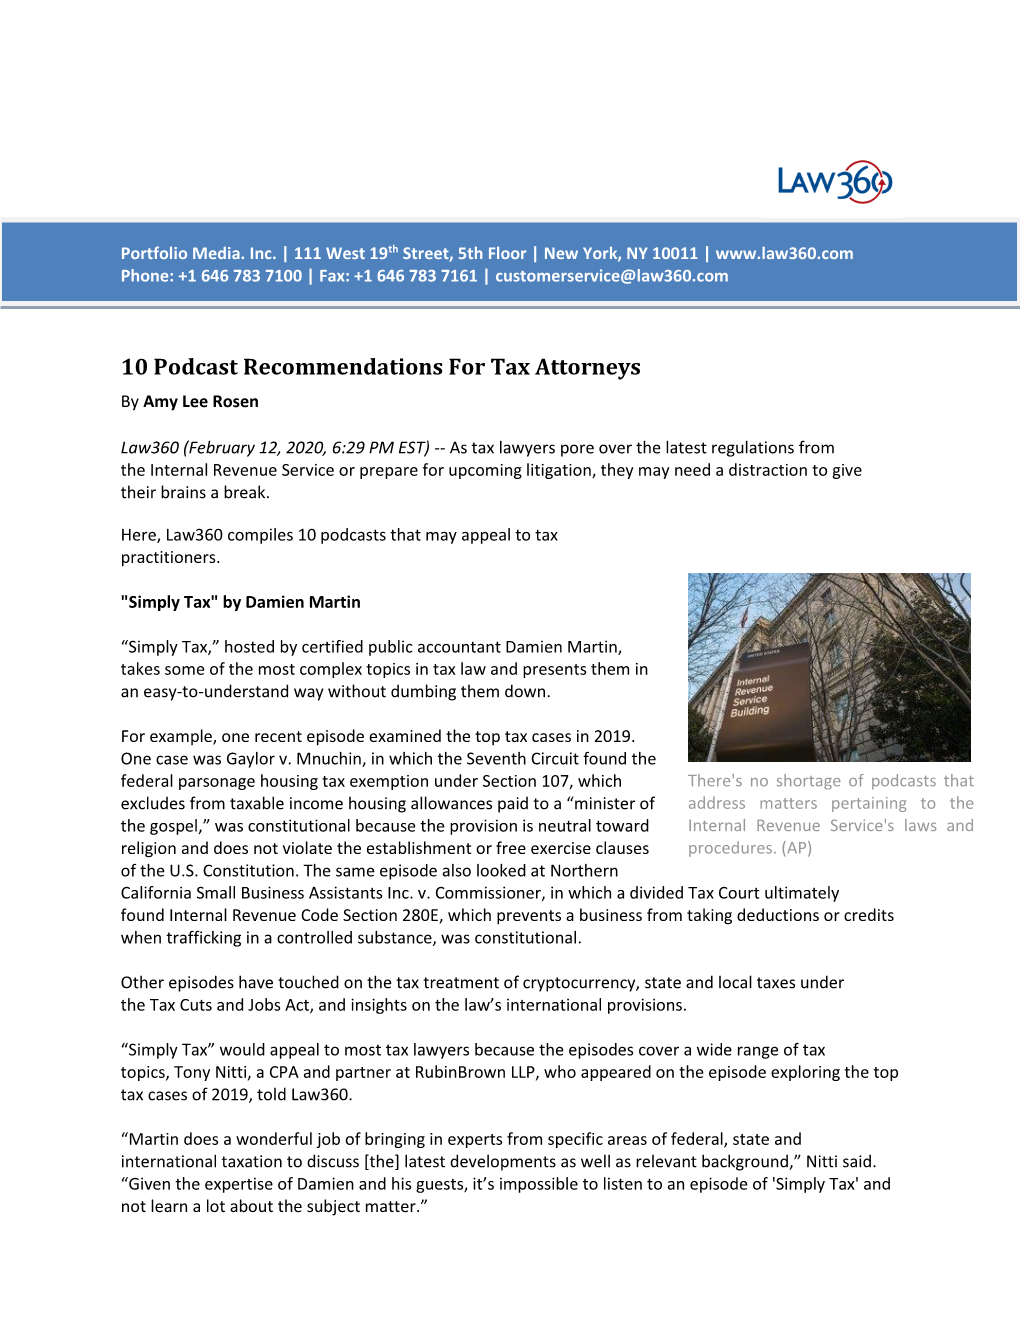 10 Podcast Recommendations for Tax Attorneys by Amy Lee Rosen